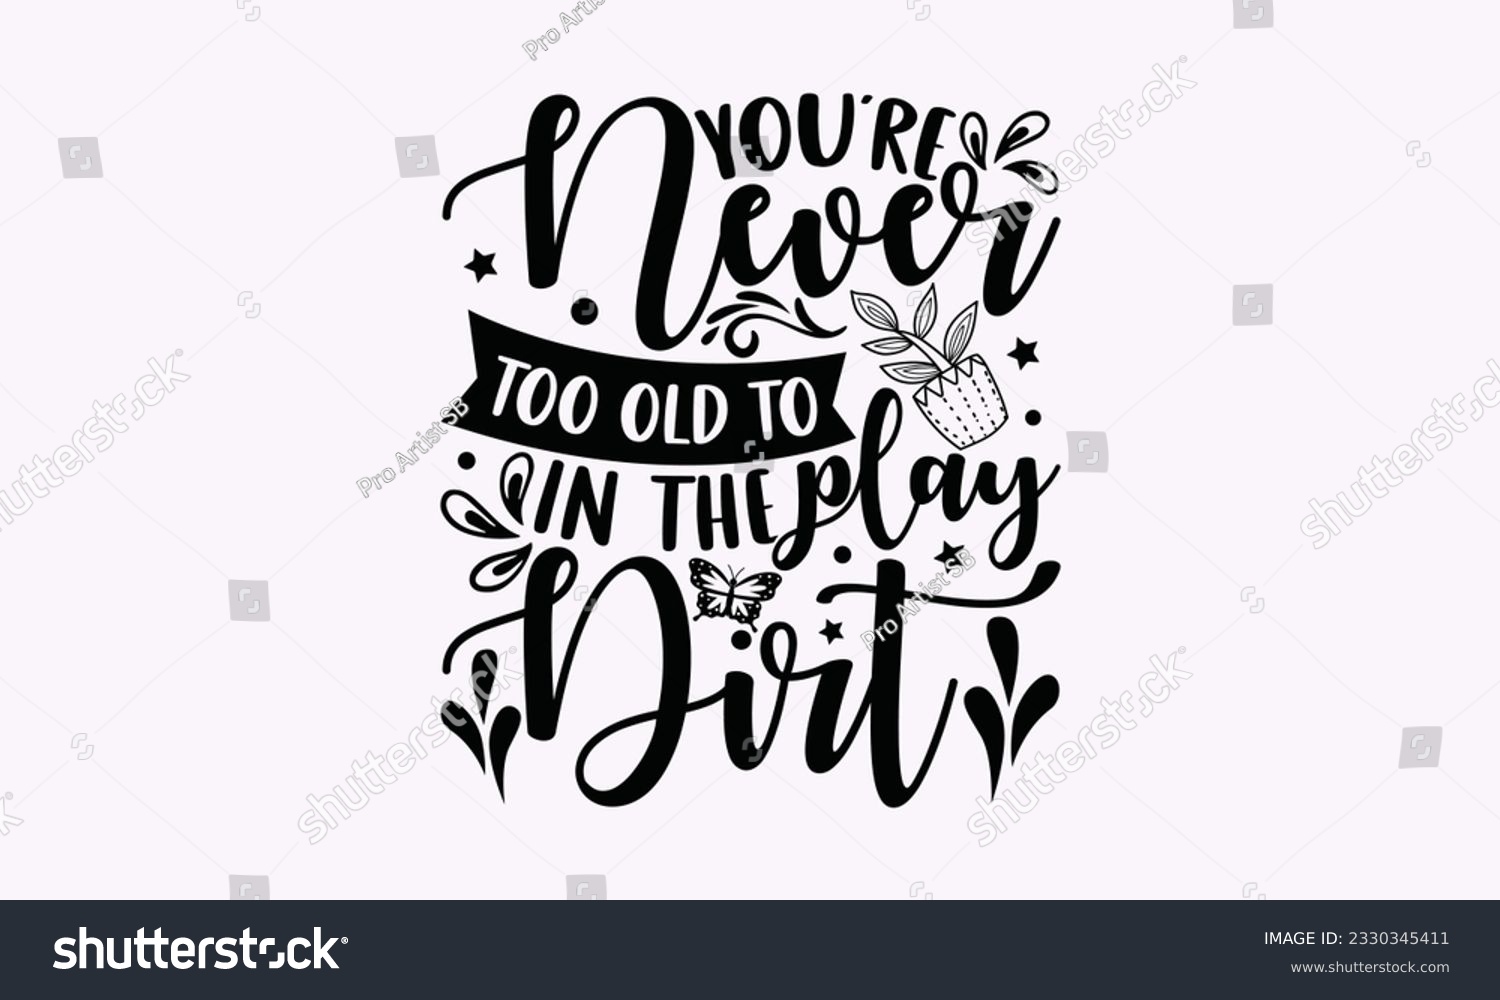 SVG of You’re never too old to play in the dirt - Gardening SVG Design, Flower Quotes, Calligraphy graphic design, Typography poster with old style camera and quote. svg